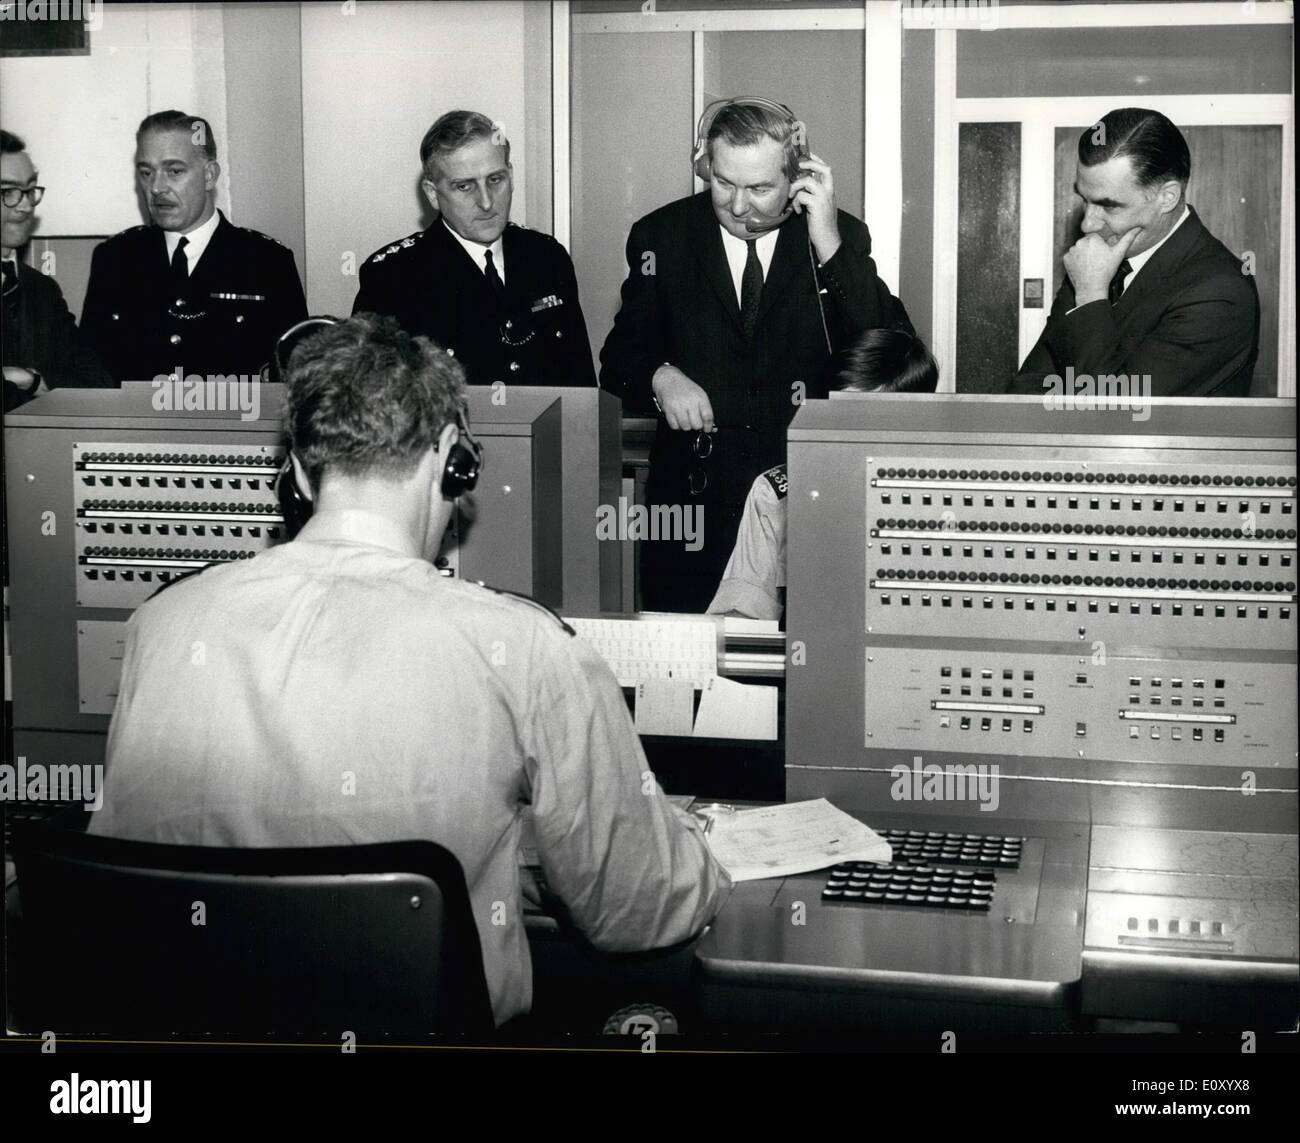 Feb. 02, 1968 - New Home Secretary at the Yard. London: New Home Secretary James Callaghan listens in on earphones in the information room at New Scotland Yard during his tour of the London police headquarters today. Stock Photo